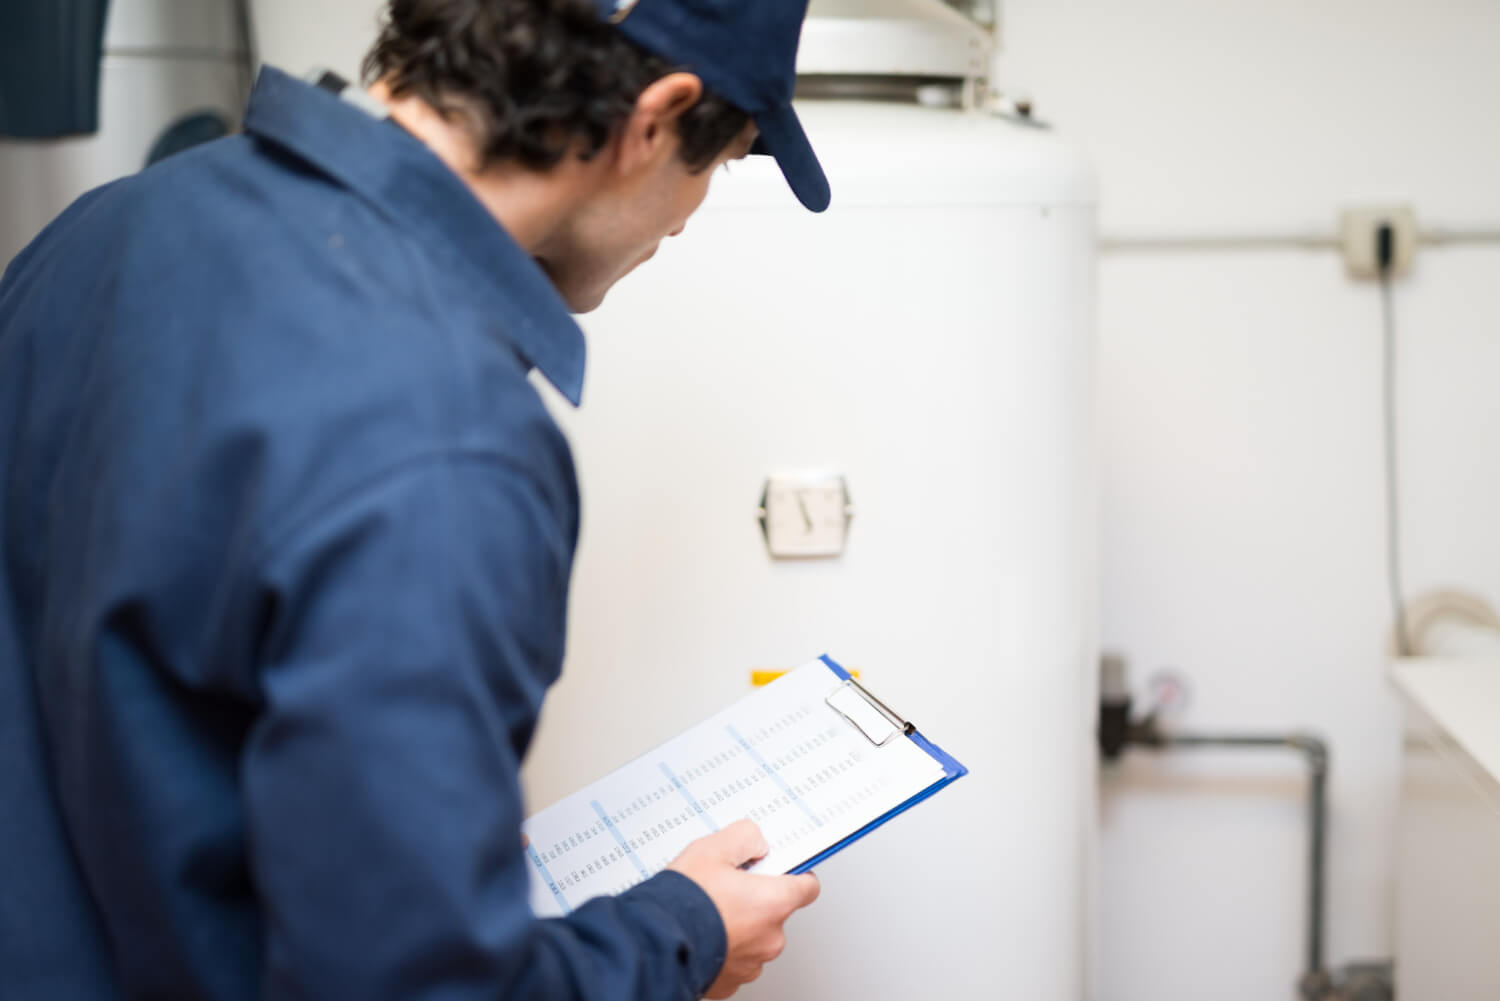 back view of plumber with blue uniform and blue hat looking at boiler while holding notebook